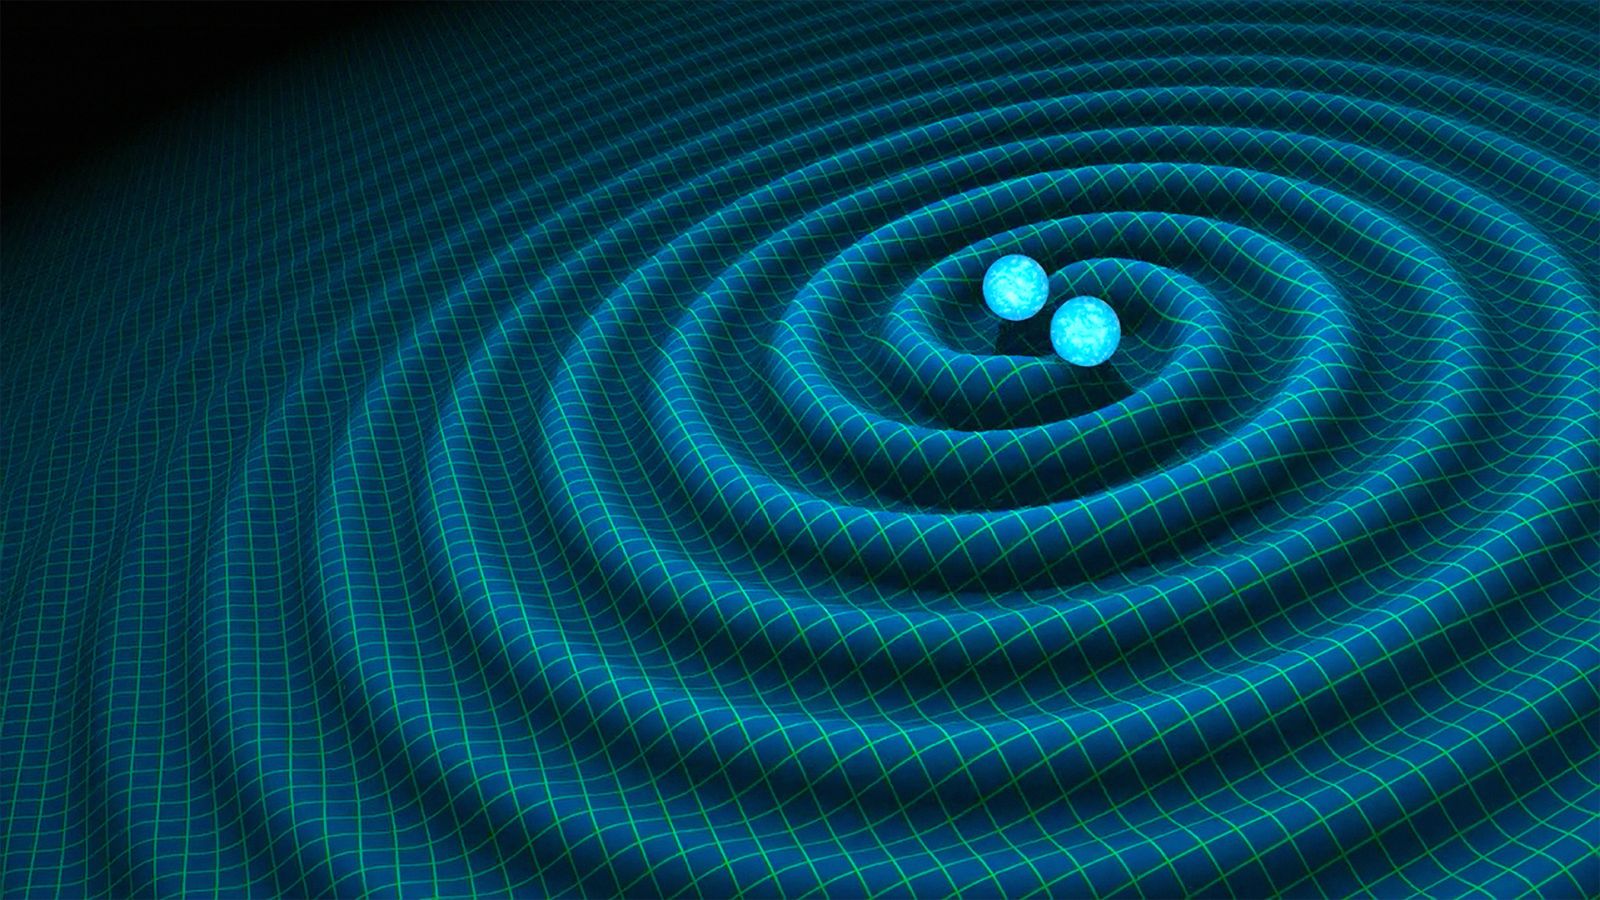 An artist's impression of gravitational waves generated by two stars orbiting around each other.